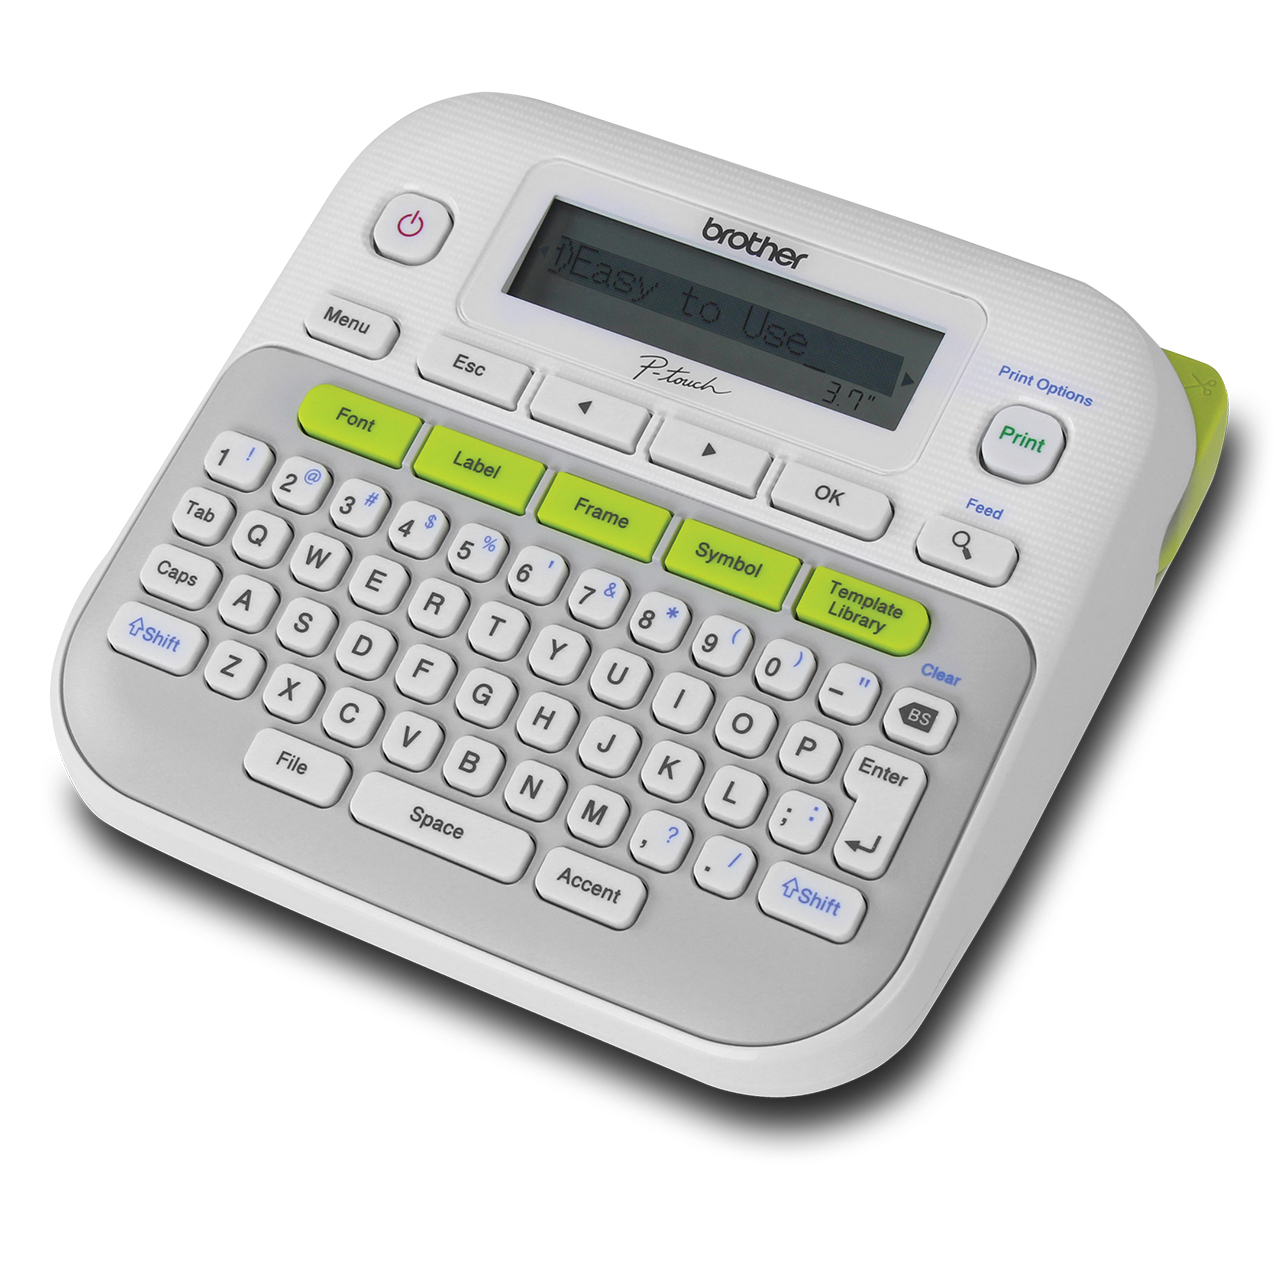 Brother PT D210 All new standalone label maker for personal purposes of hobby and home use